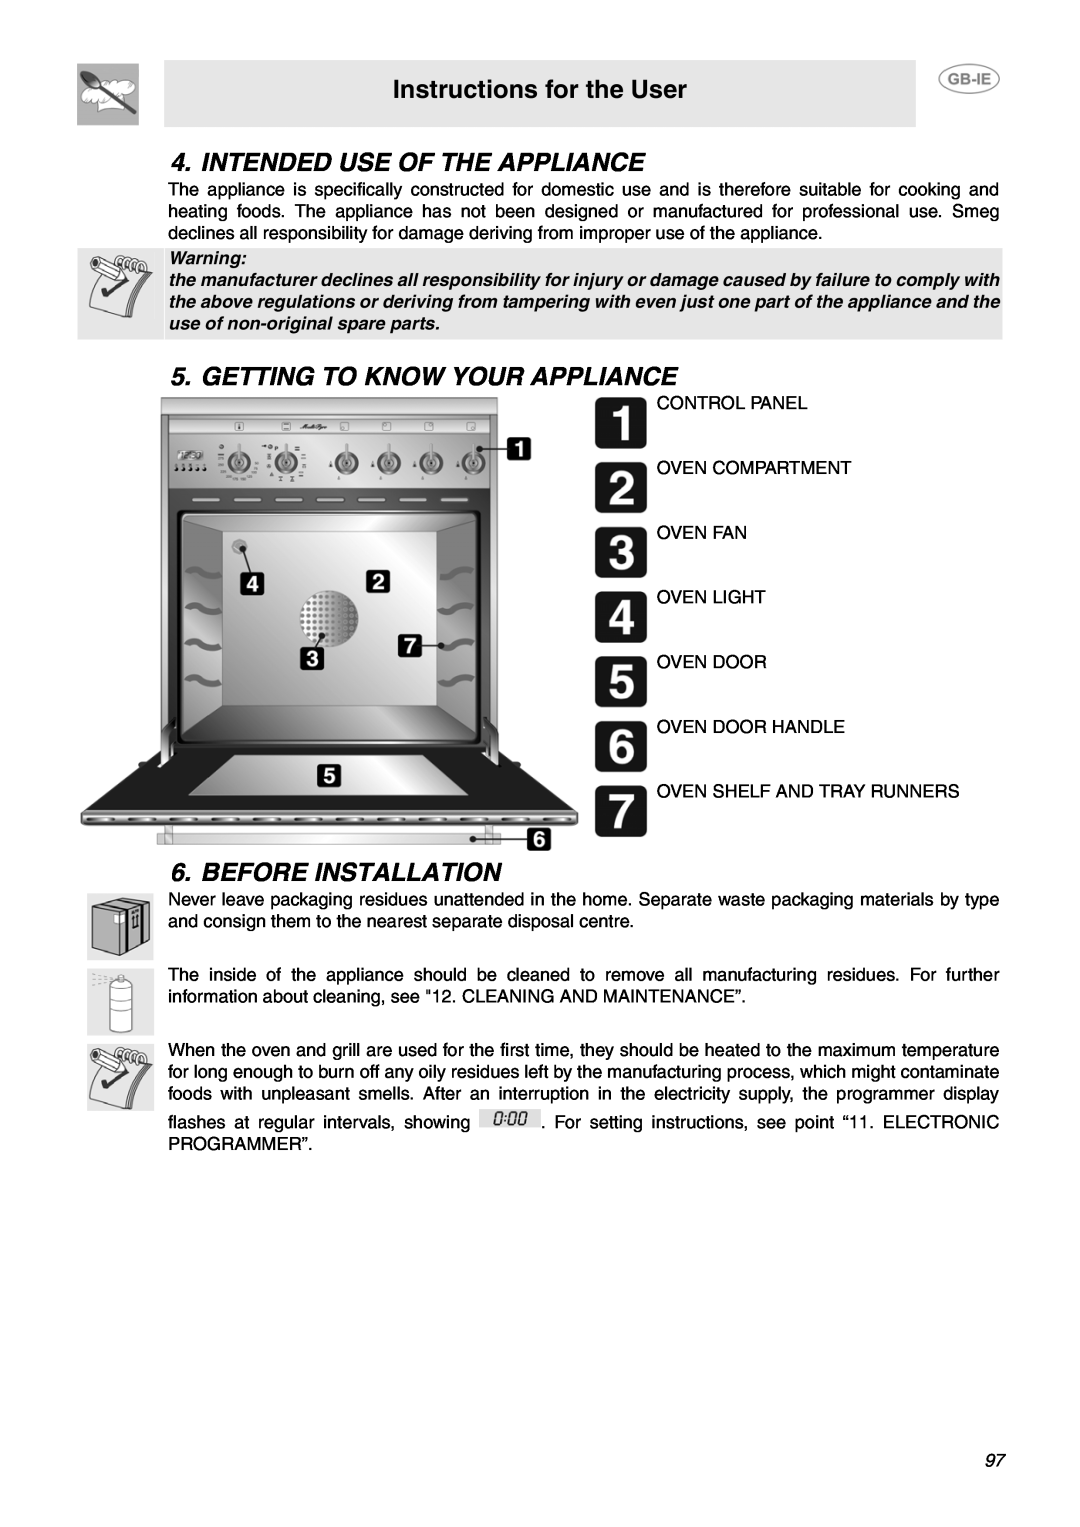 Smeg B71MPX5 Instructions for the User, Intended Use Of The Appliance, Getting To Know Your Appliance, Before Installation 